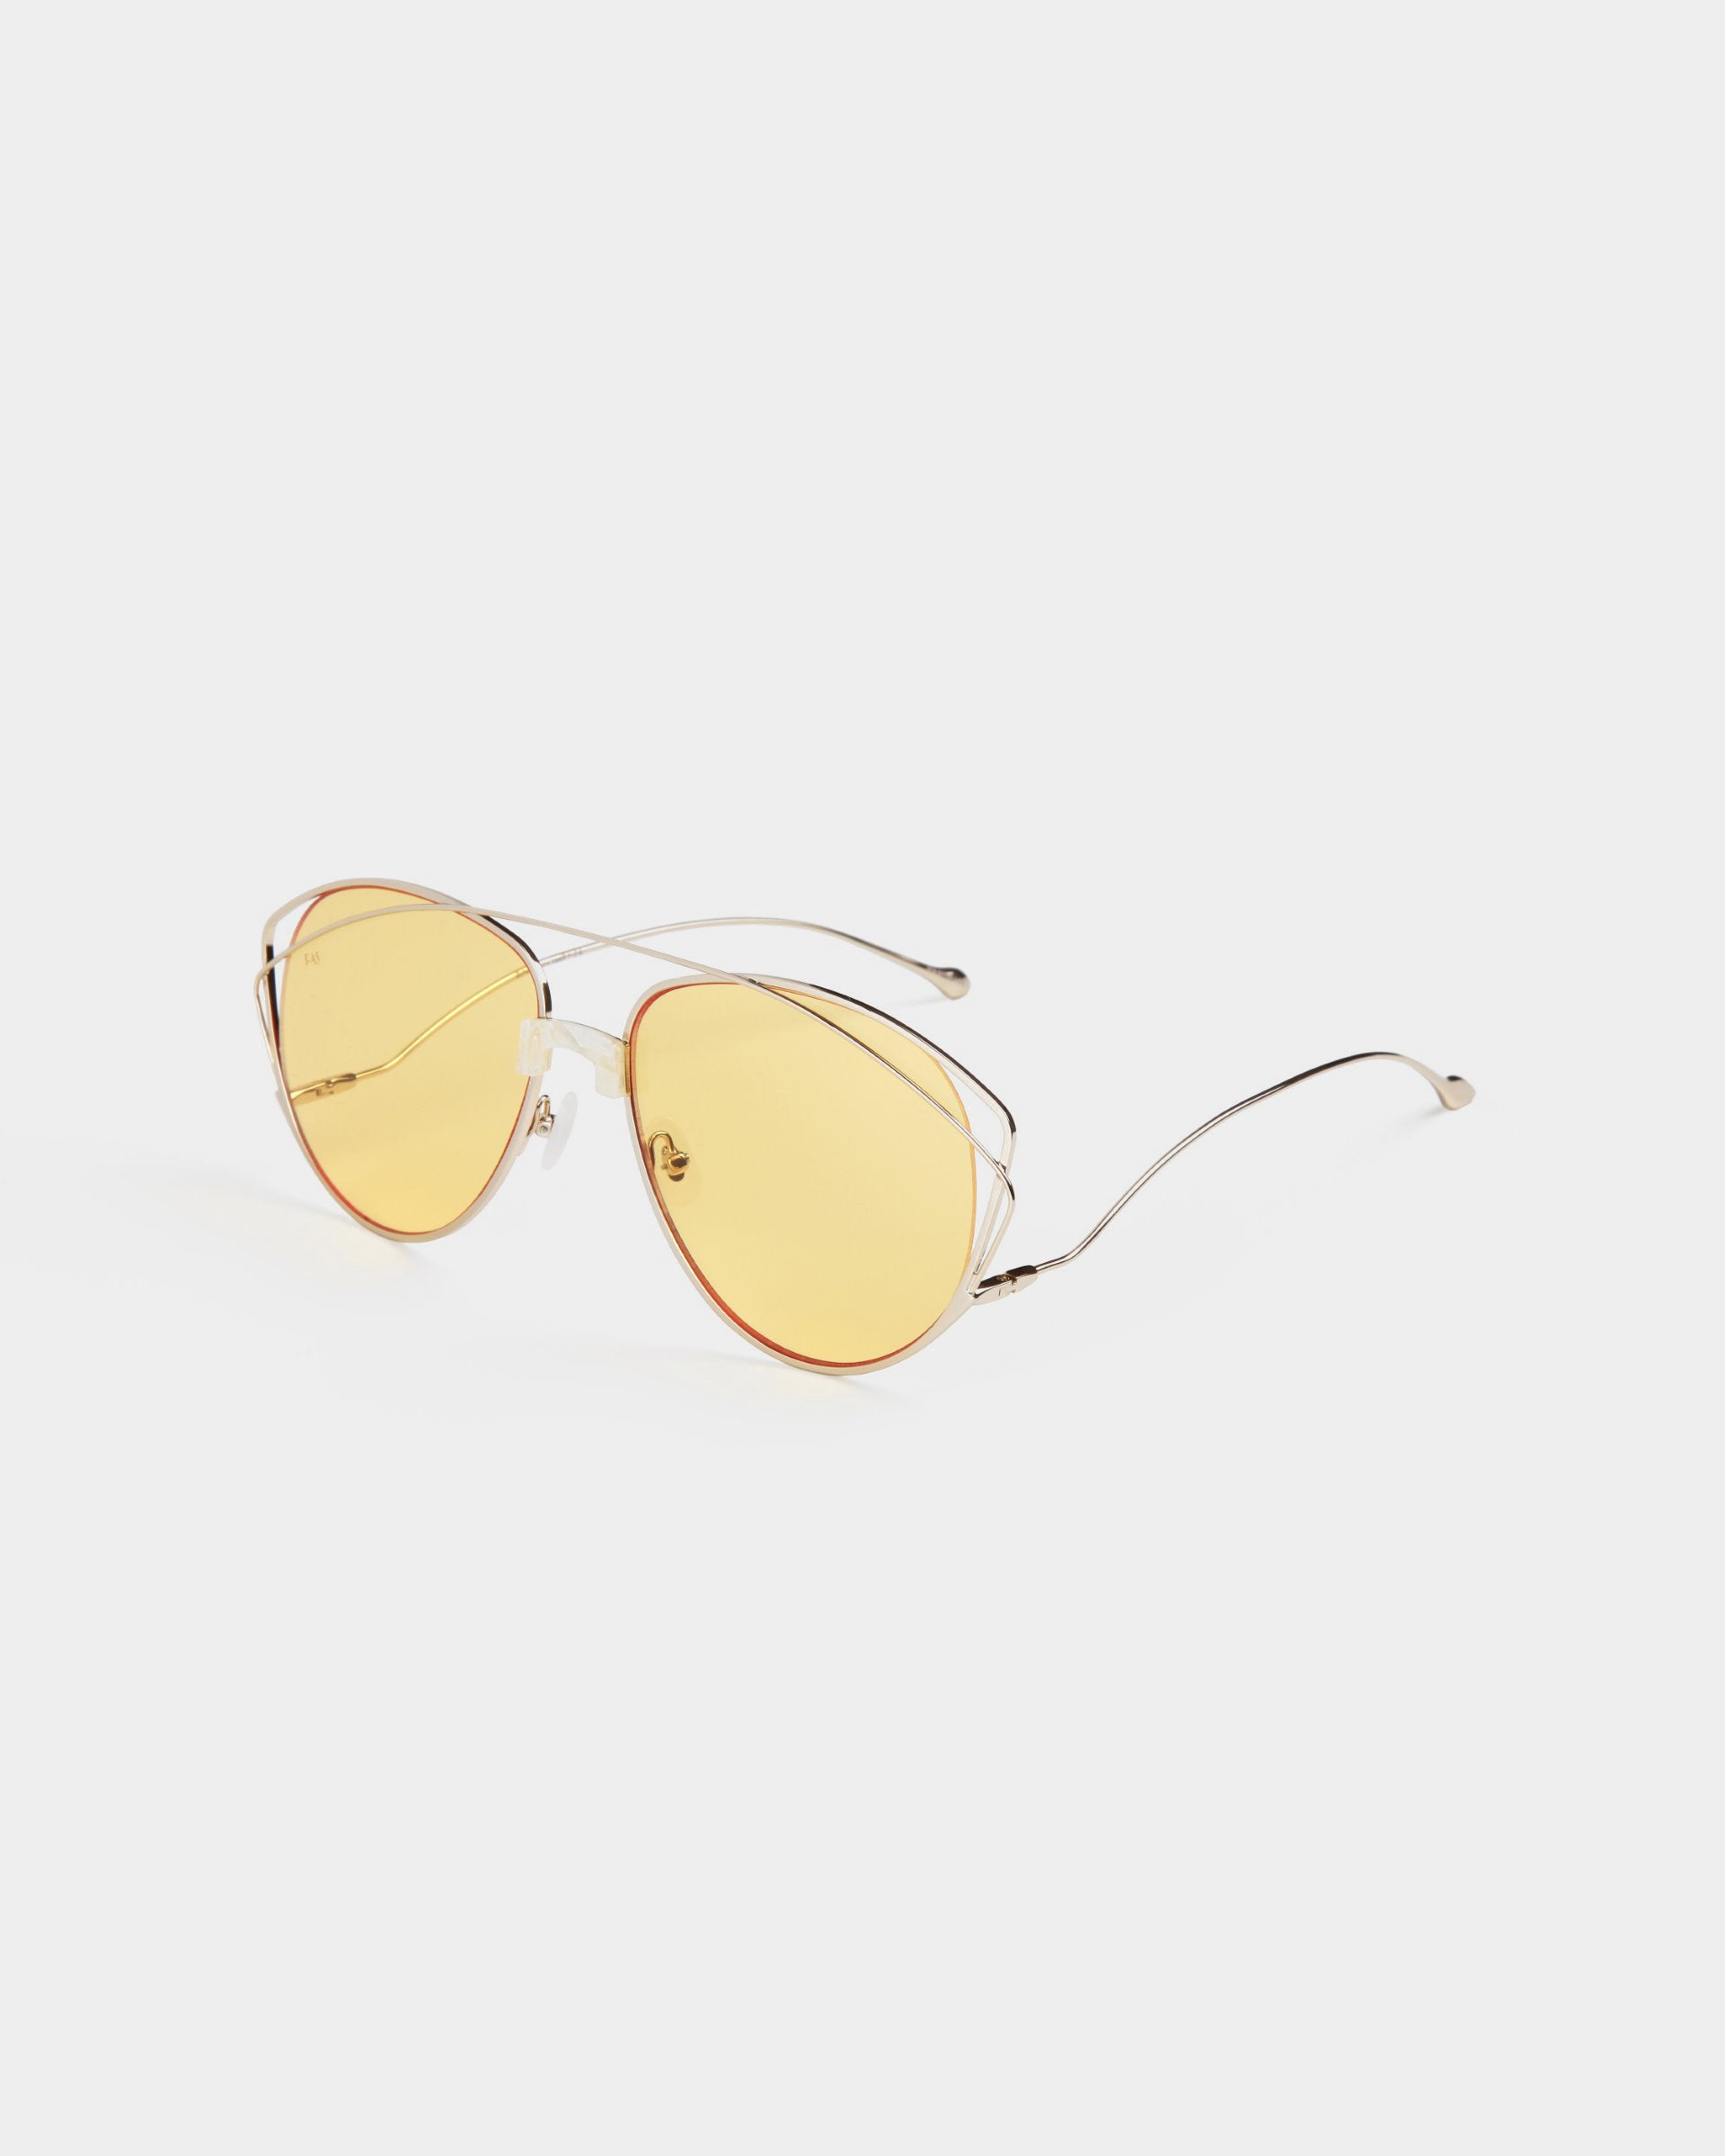 A pair of aviator-style sunglasses with slender stainless steel frames and amber-tinted nylon lenses is shown against a white background. Boasting 100% UV protection, the arms of the For Art&#39;s Sake® Dark Eyes glasses are thin and slightly curved at the tips.